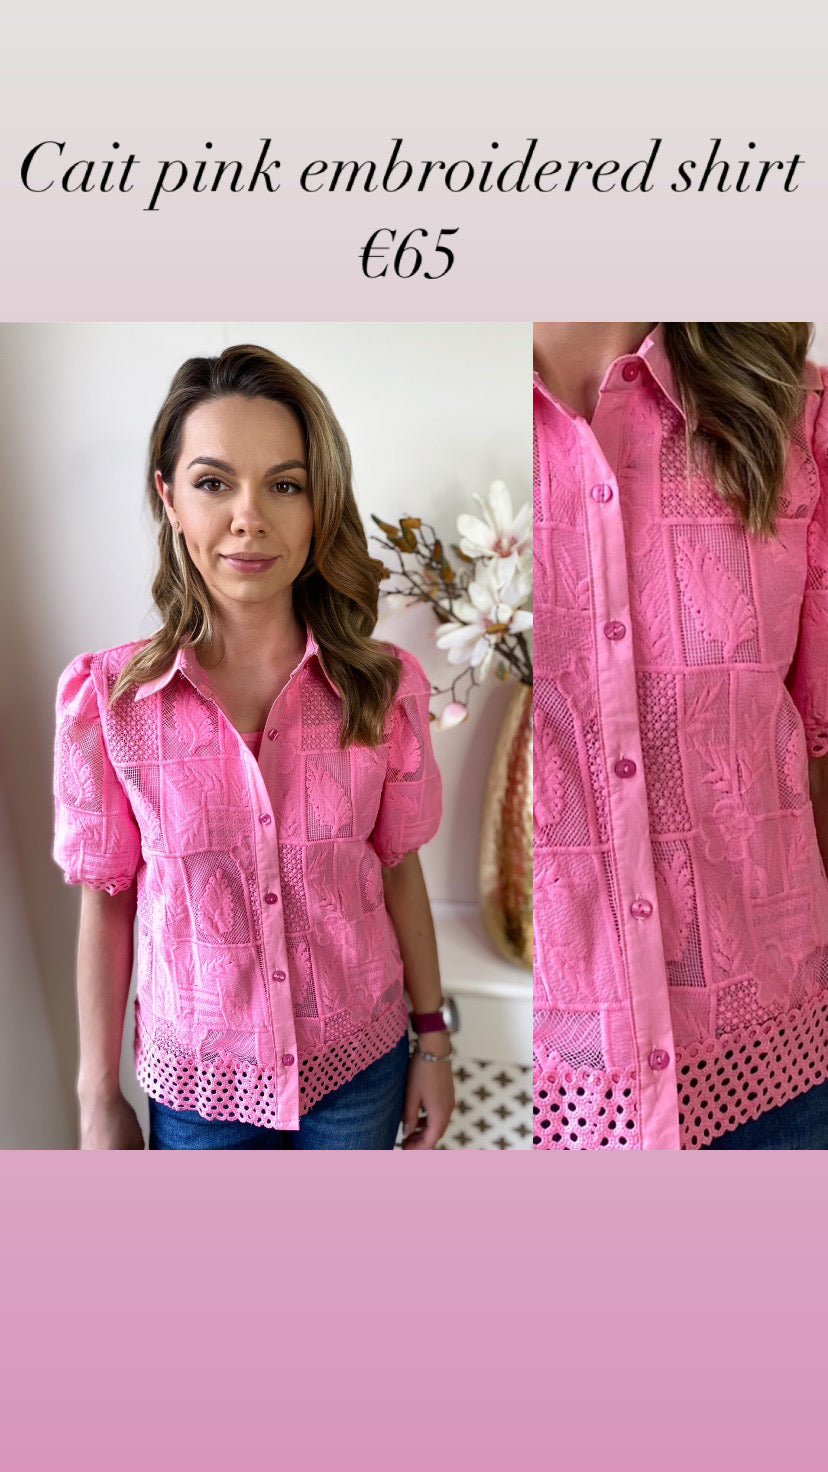 Cait pink embroidered shirt